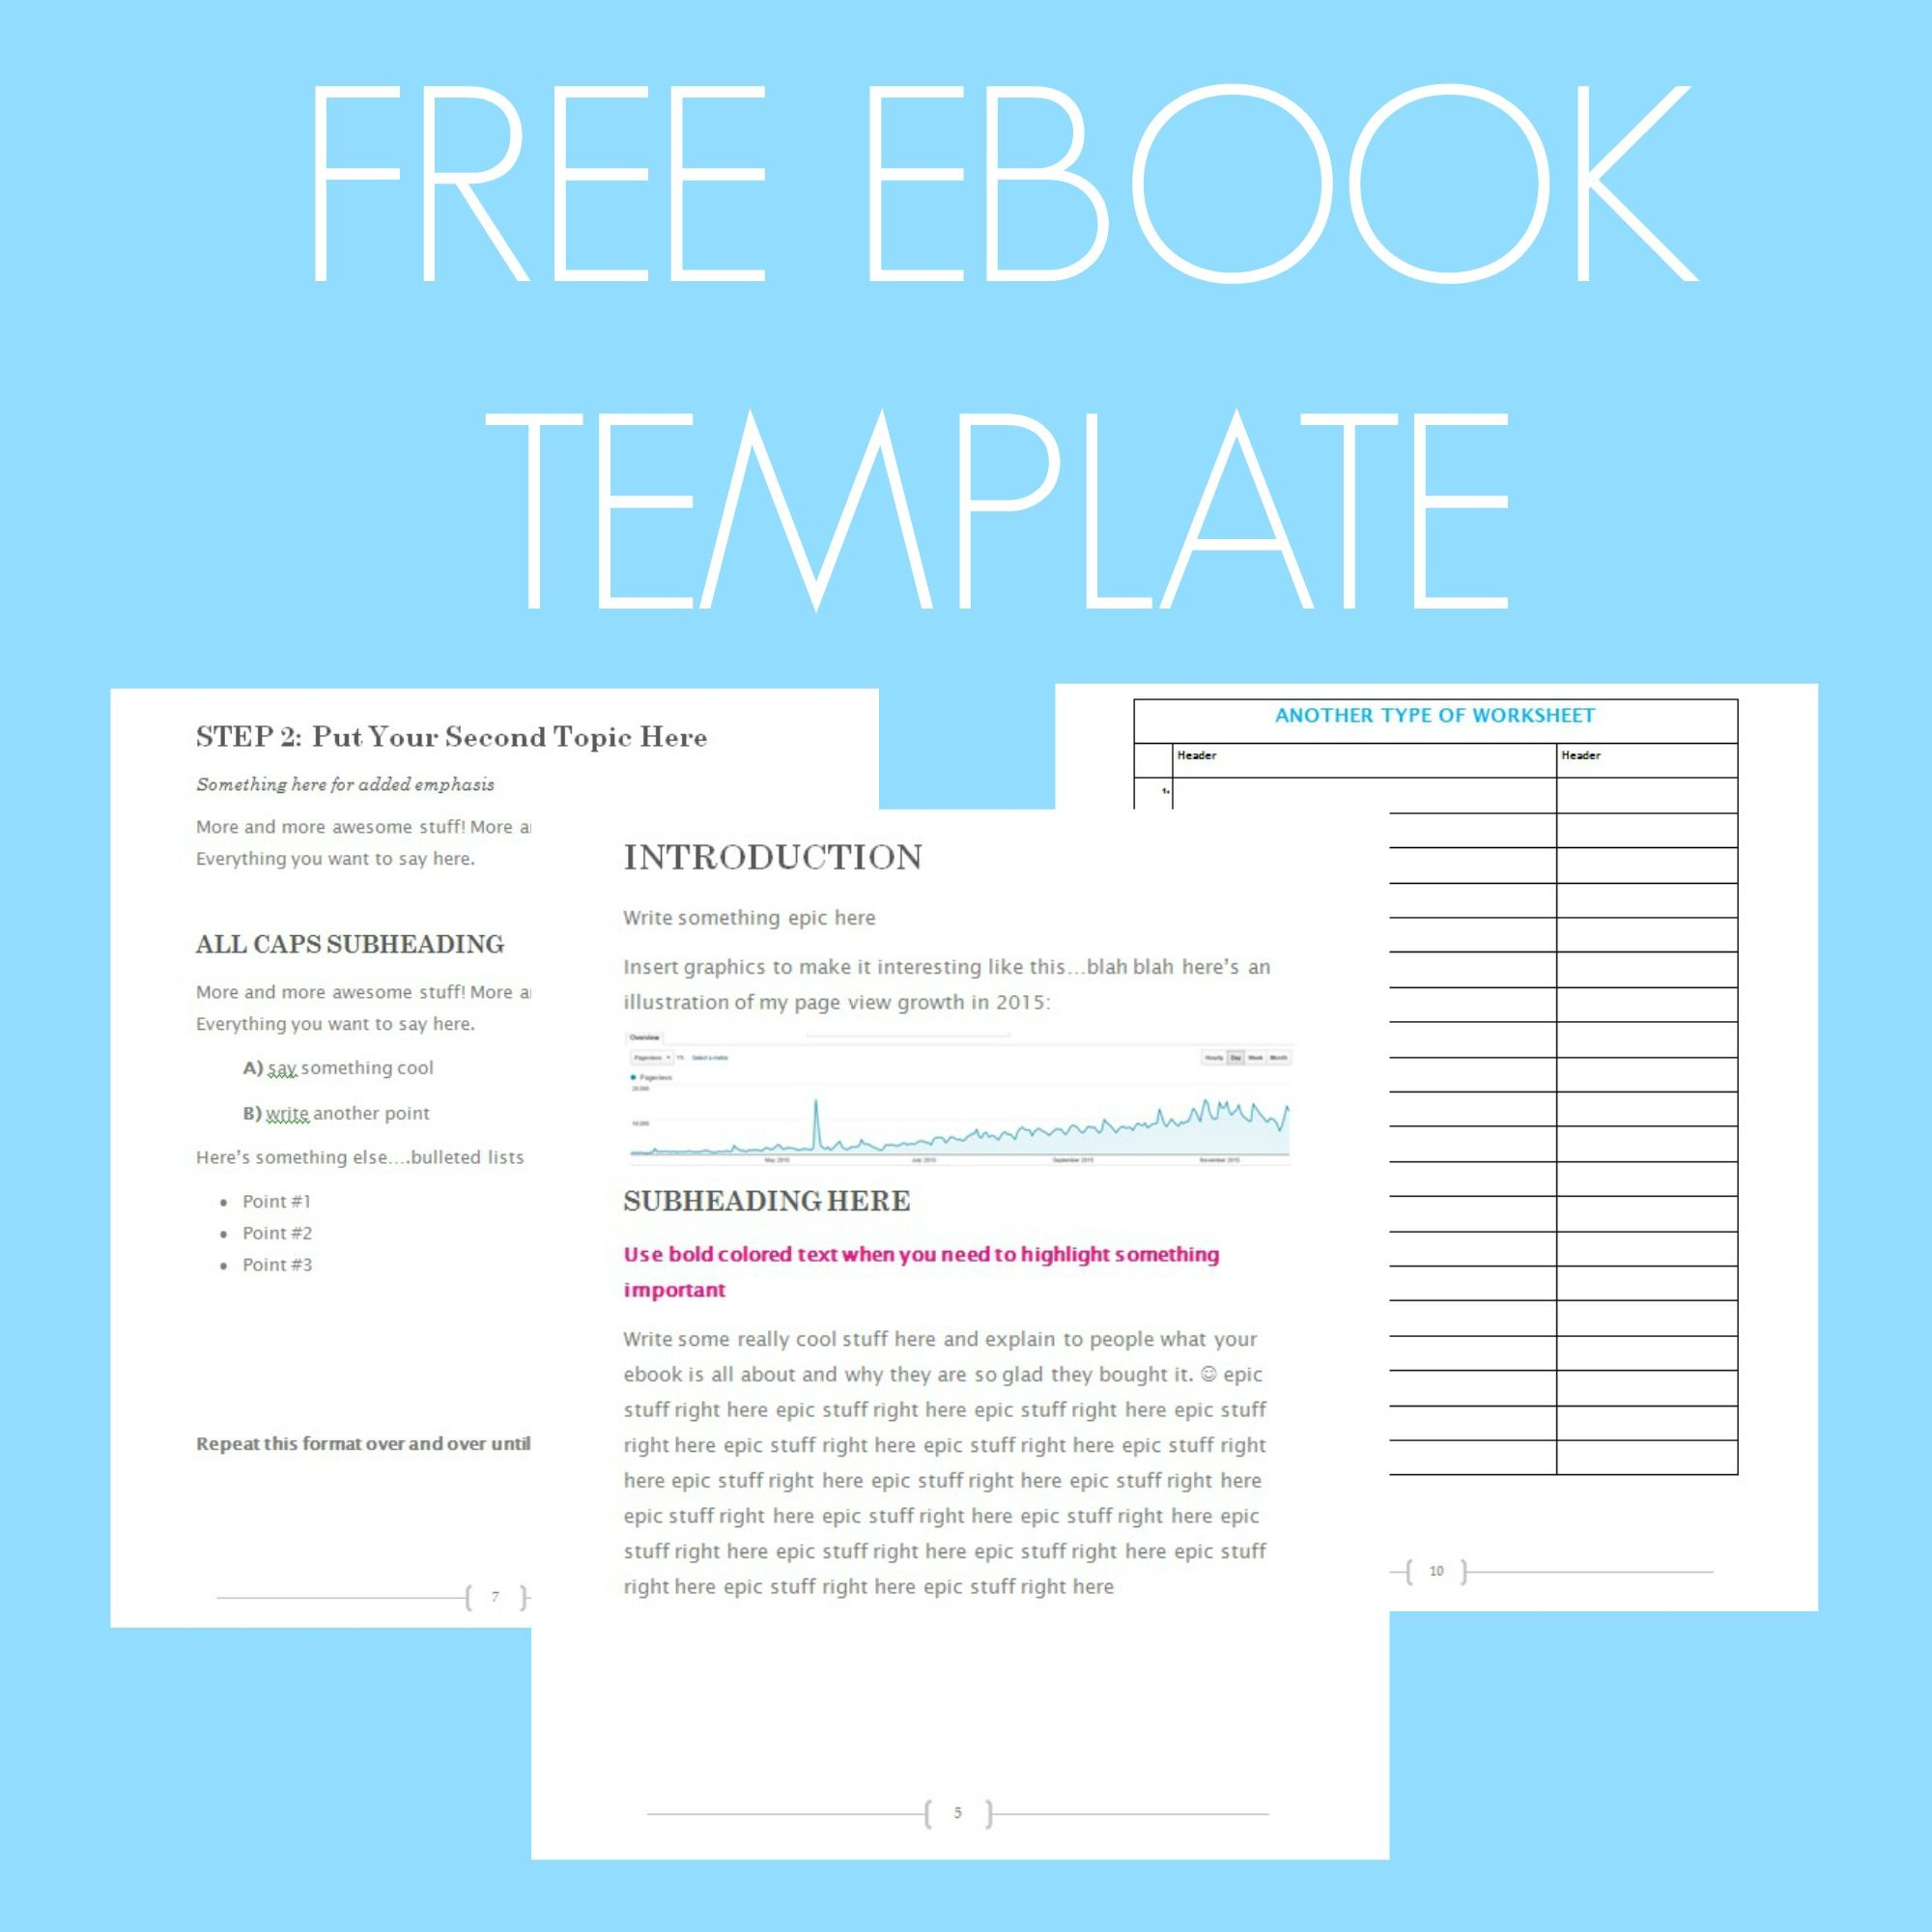 Free Ebook Template – Preformatted Word Document | Writing Within Another Word For Template